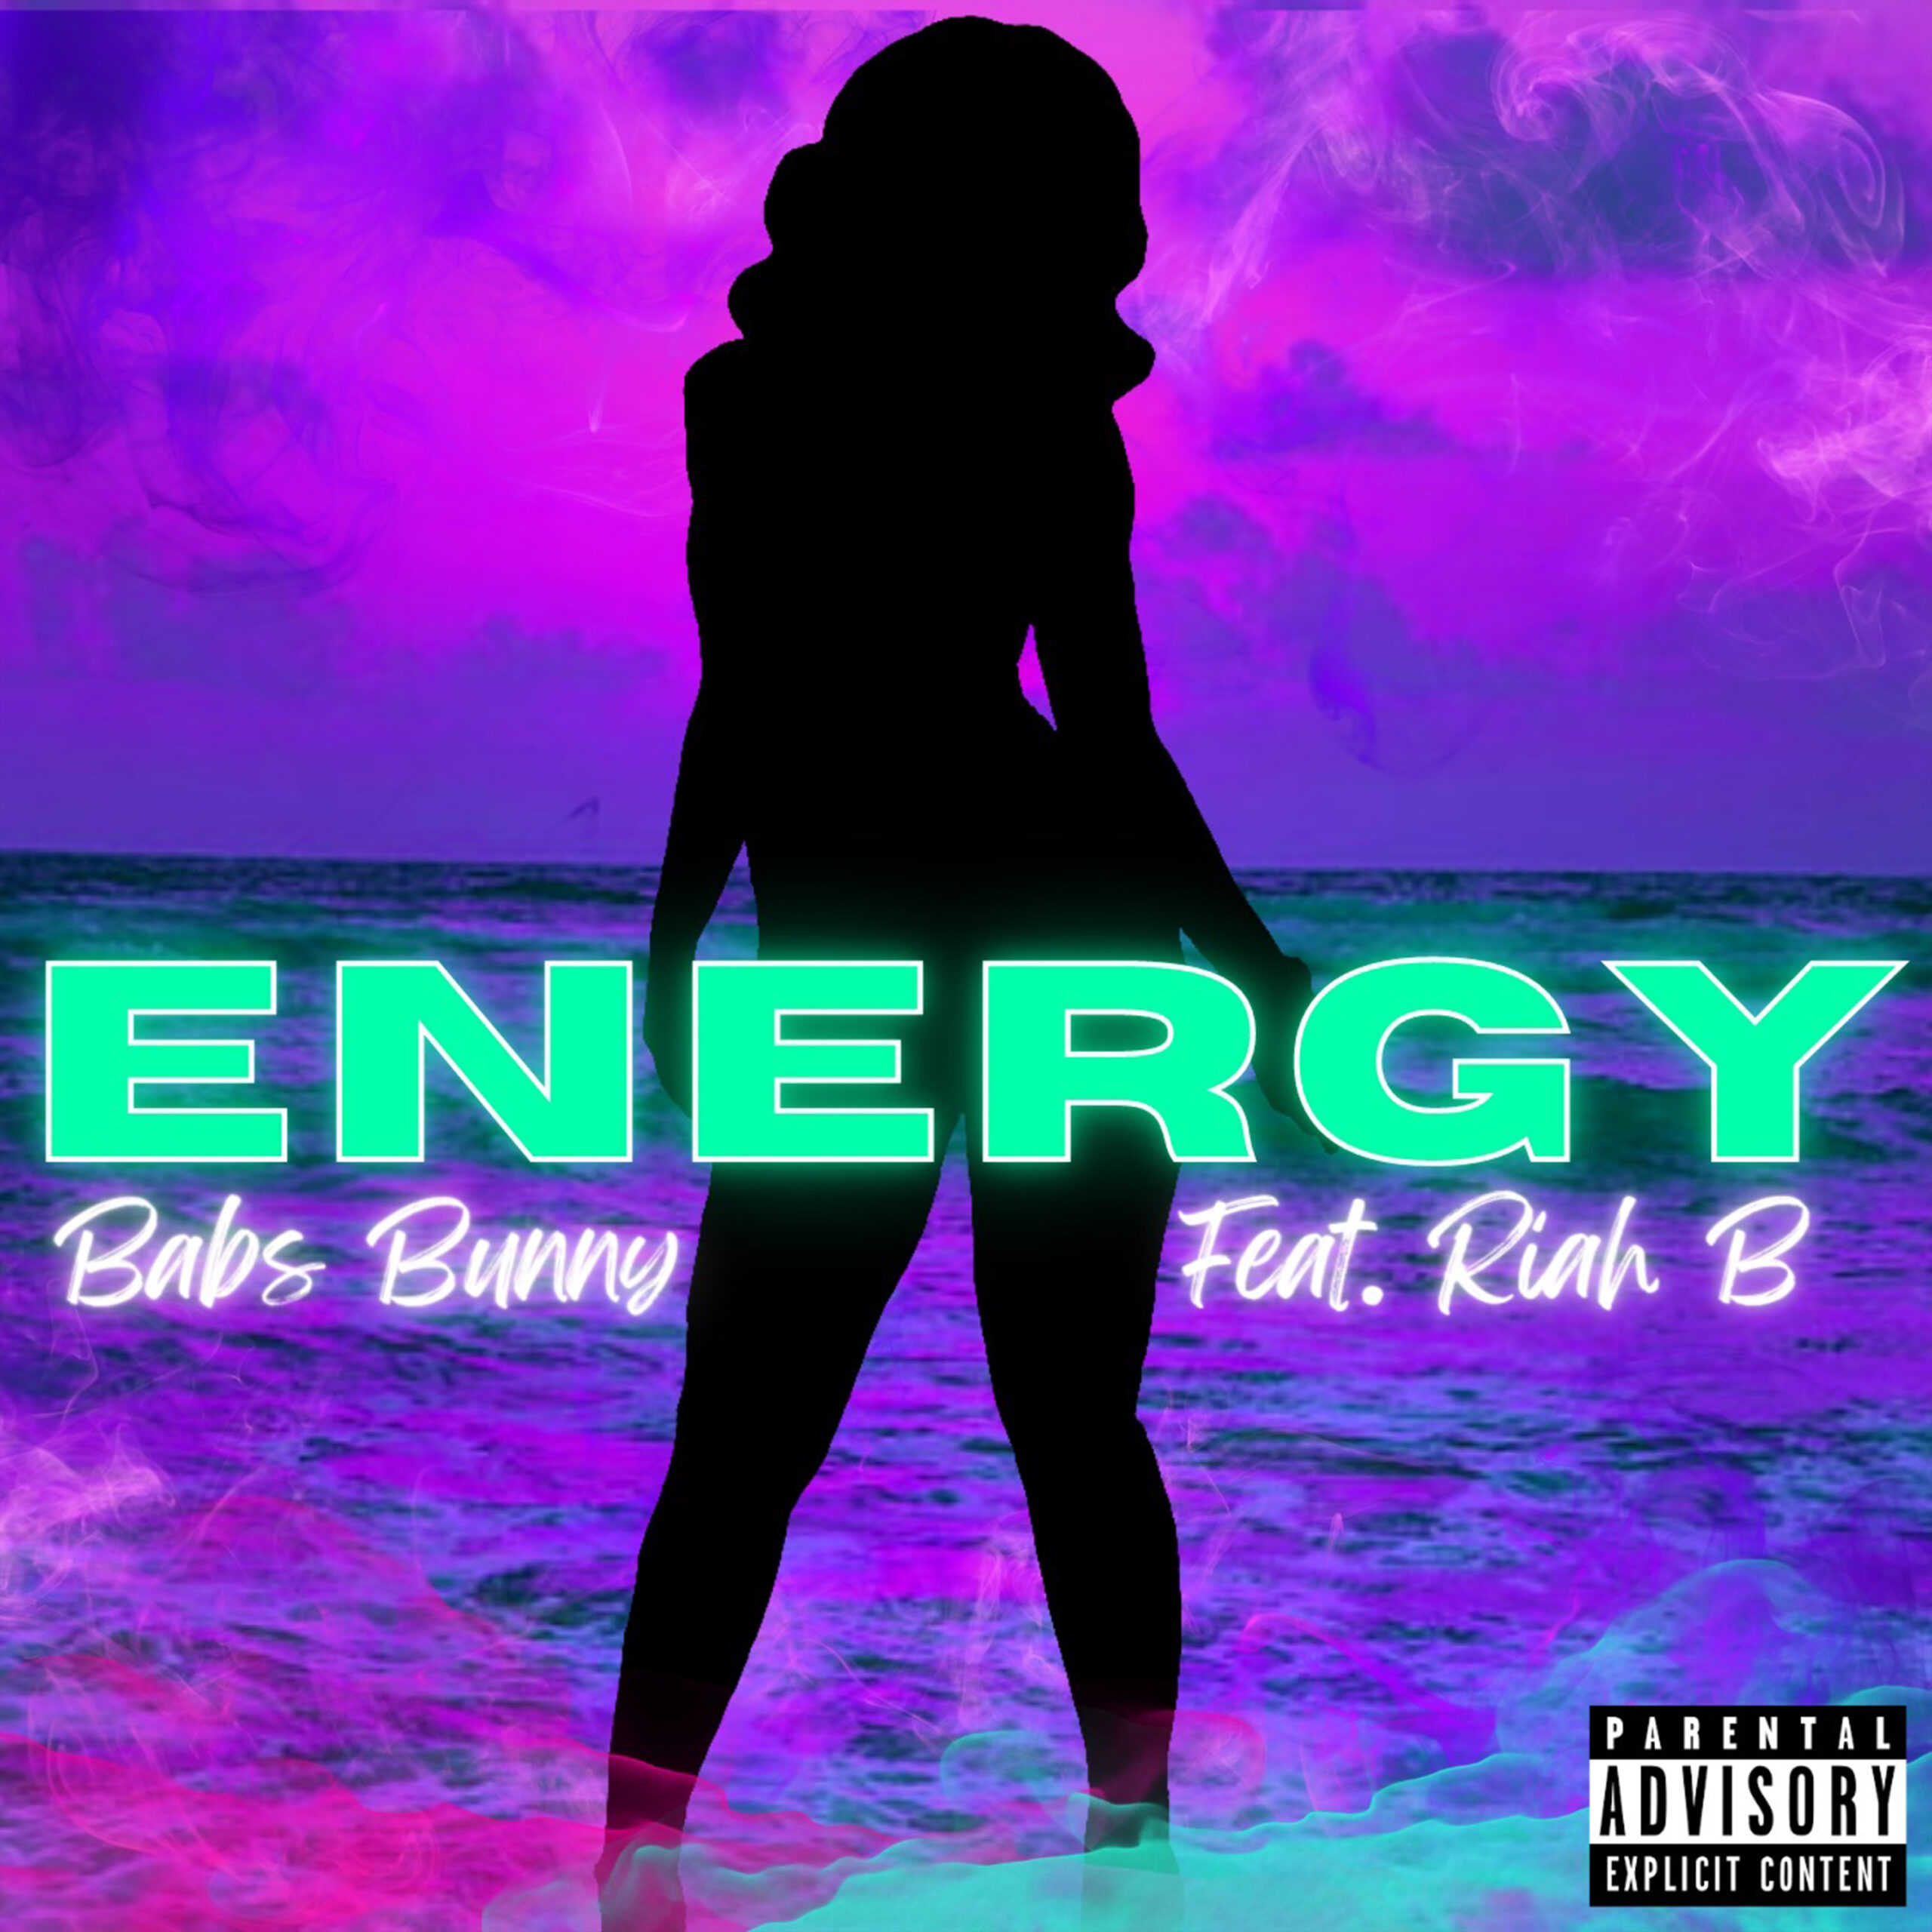 New Music: Babs Bunny – Energy Featuring Riah B |